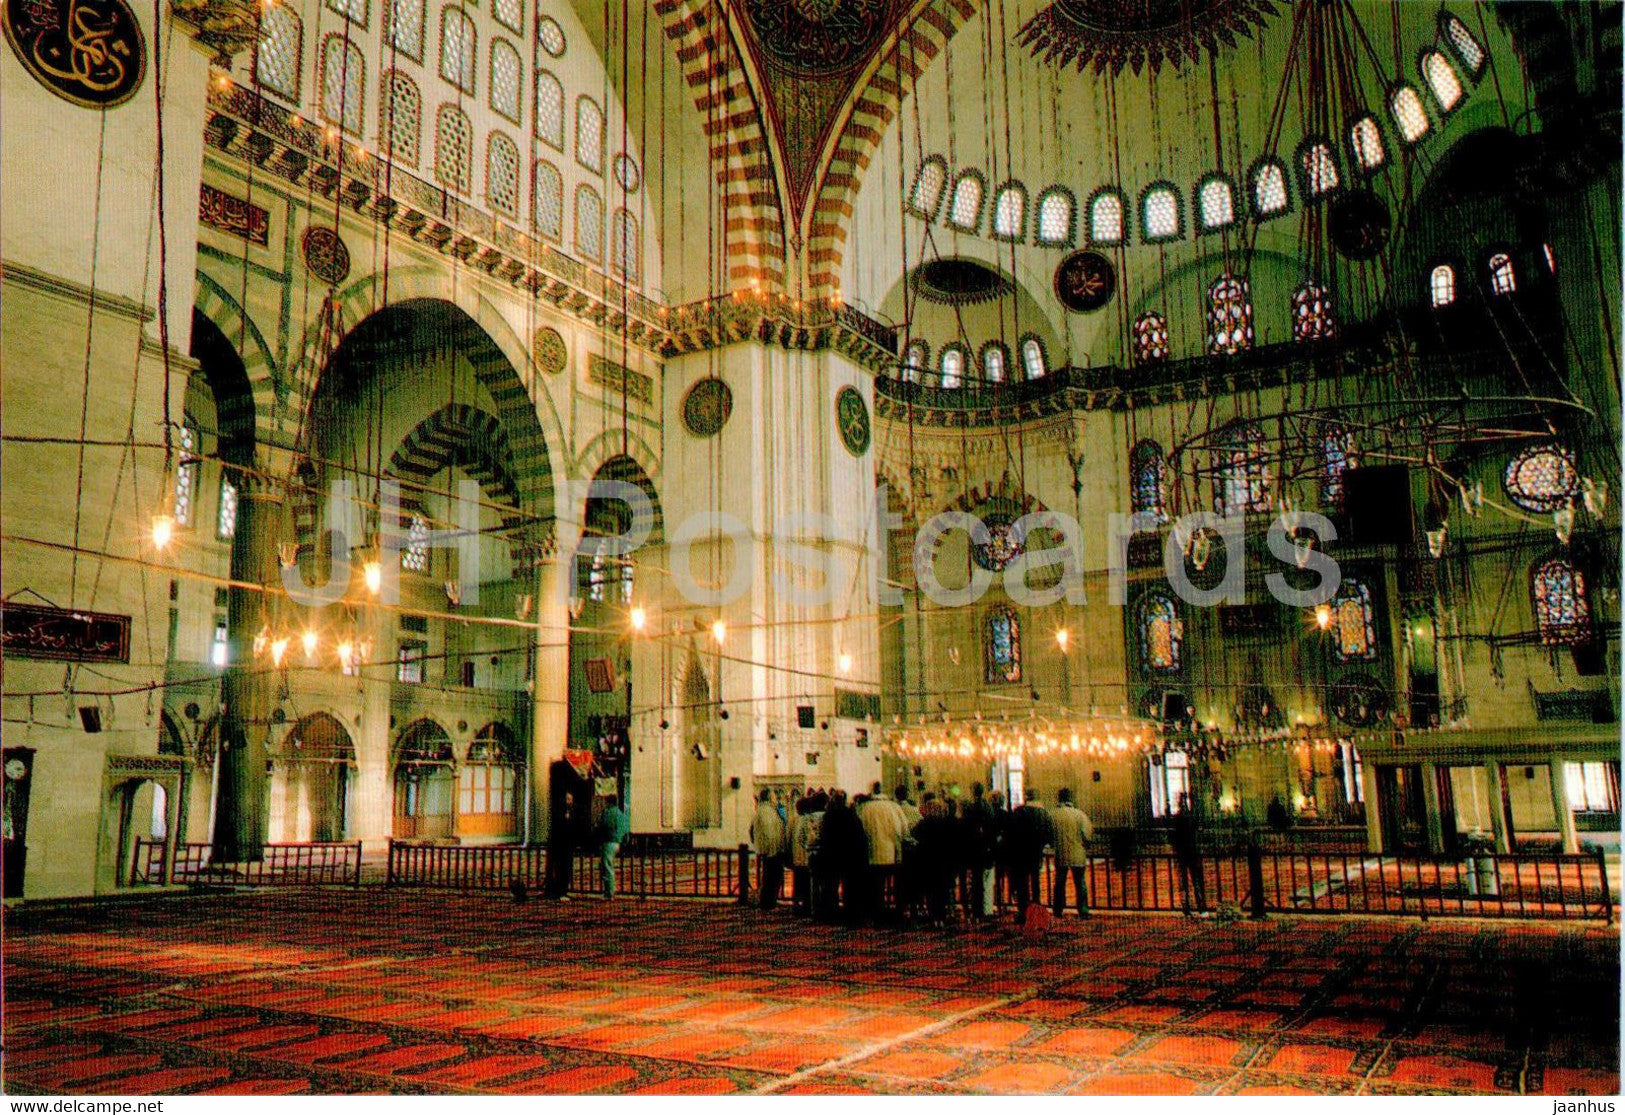 Istanbul - Interior of Soliman the Magnificent - 34-38 - Turkey - unused - JH Postcards